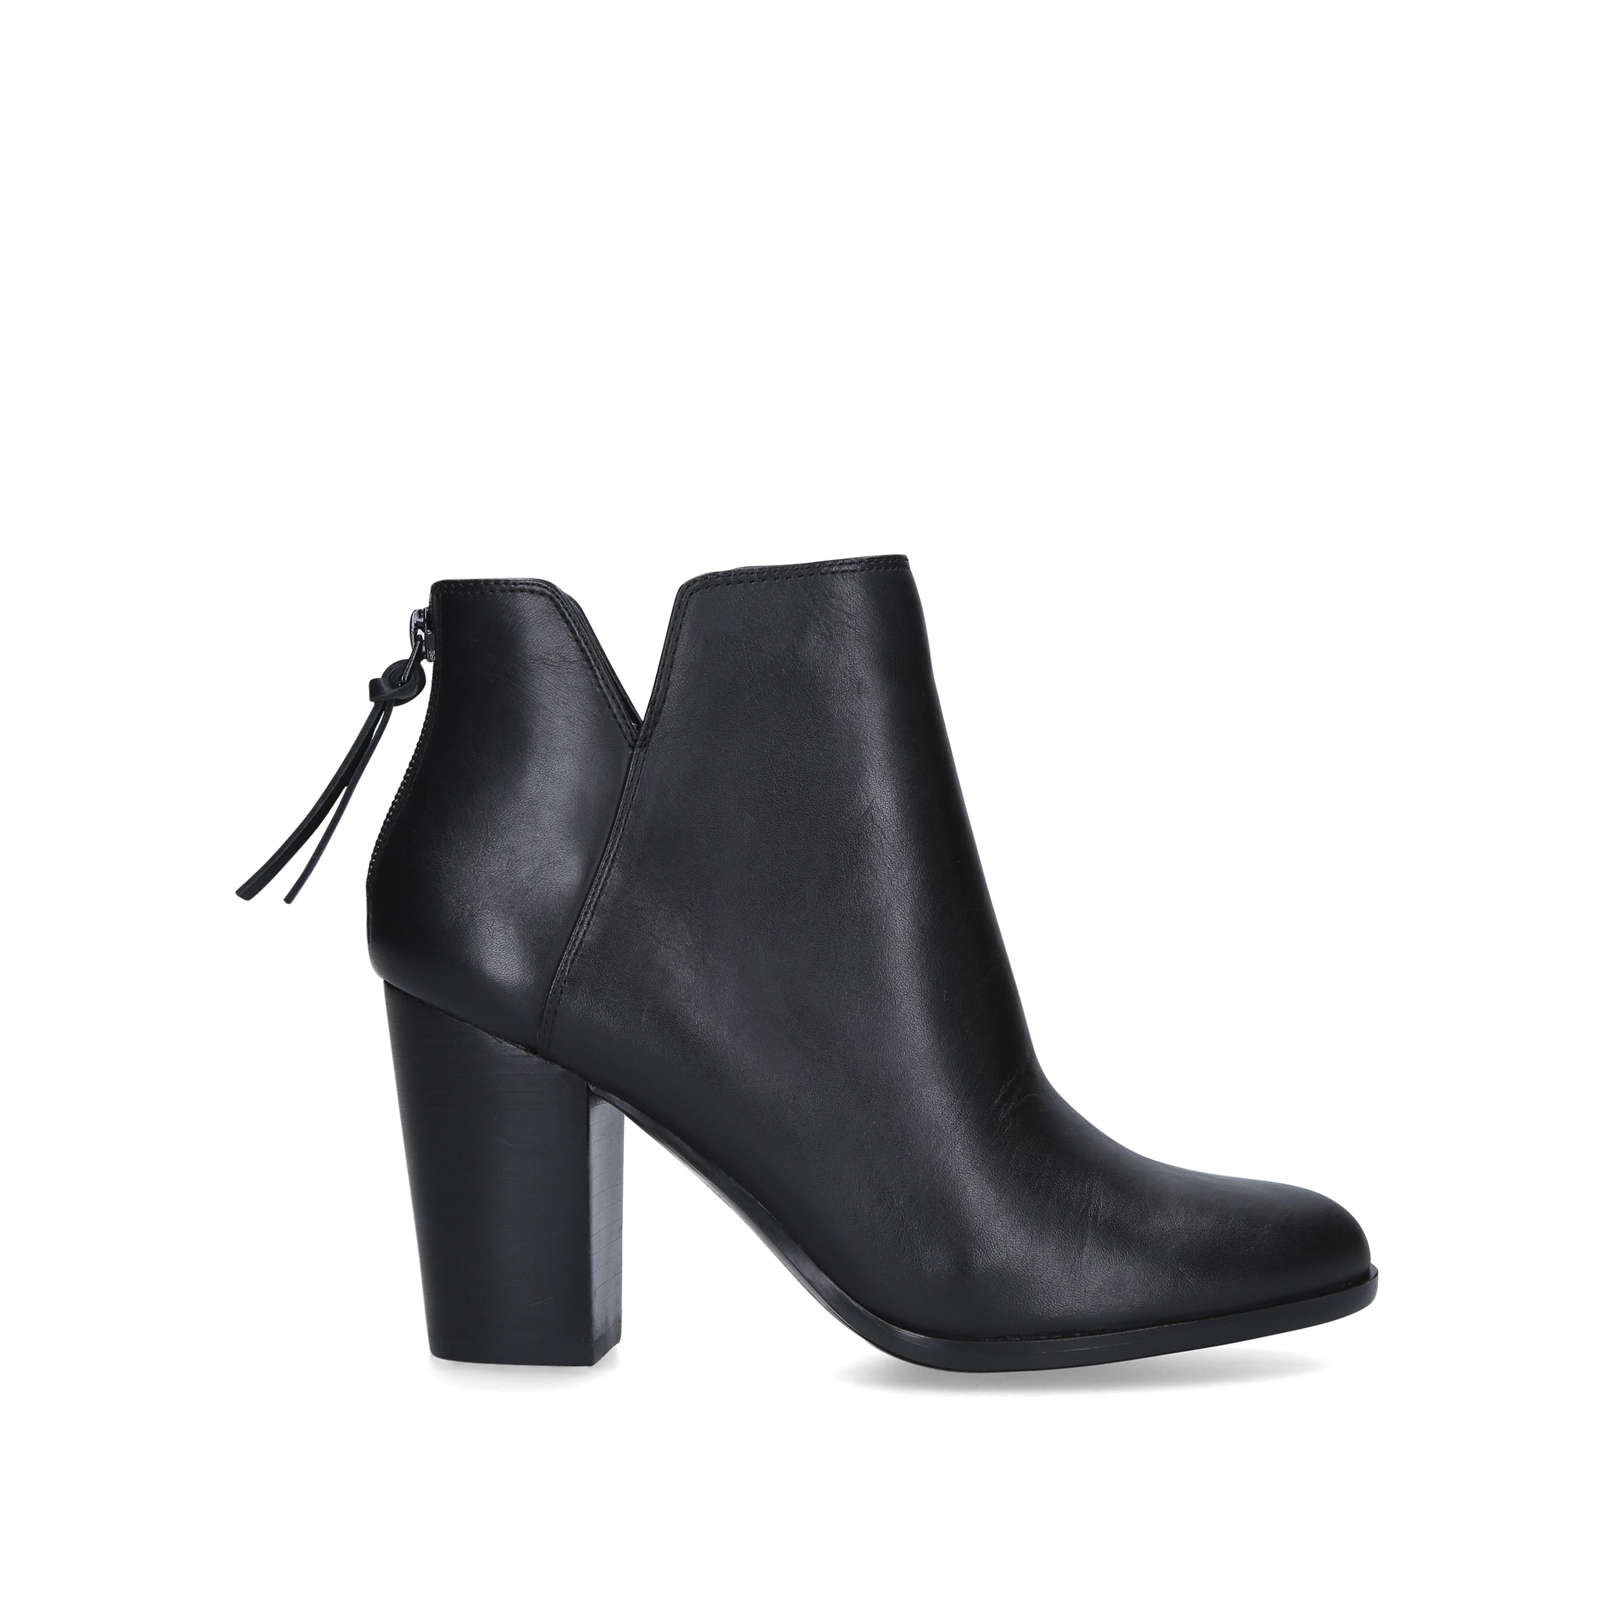 LALITH - ALDO Ankle Boots